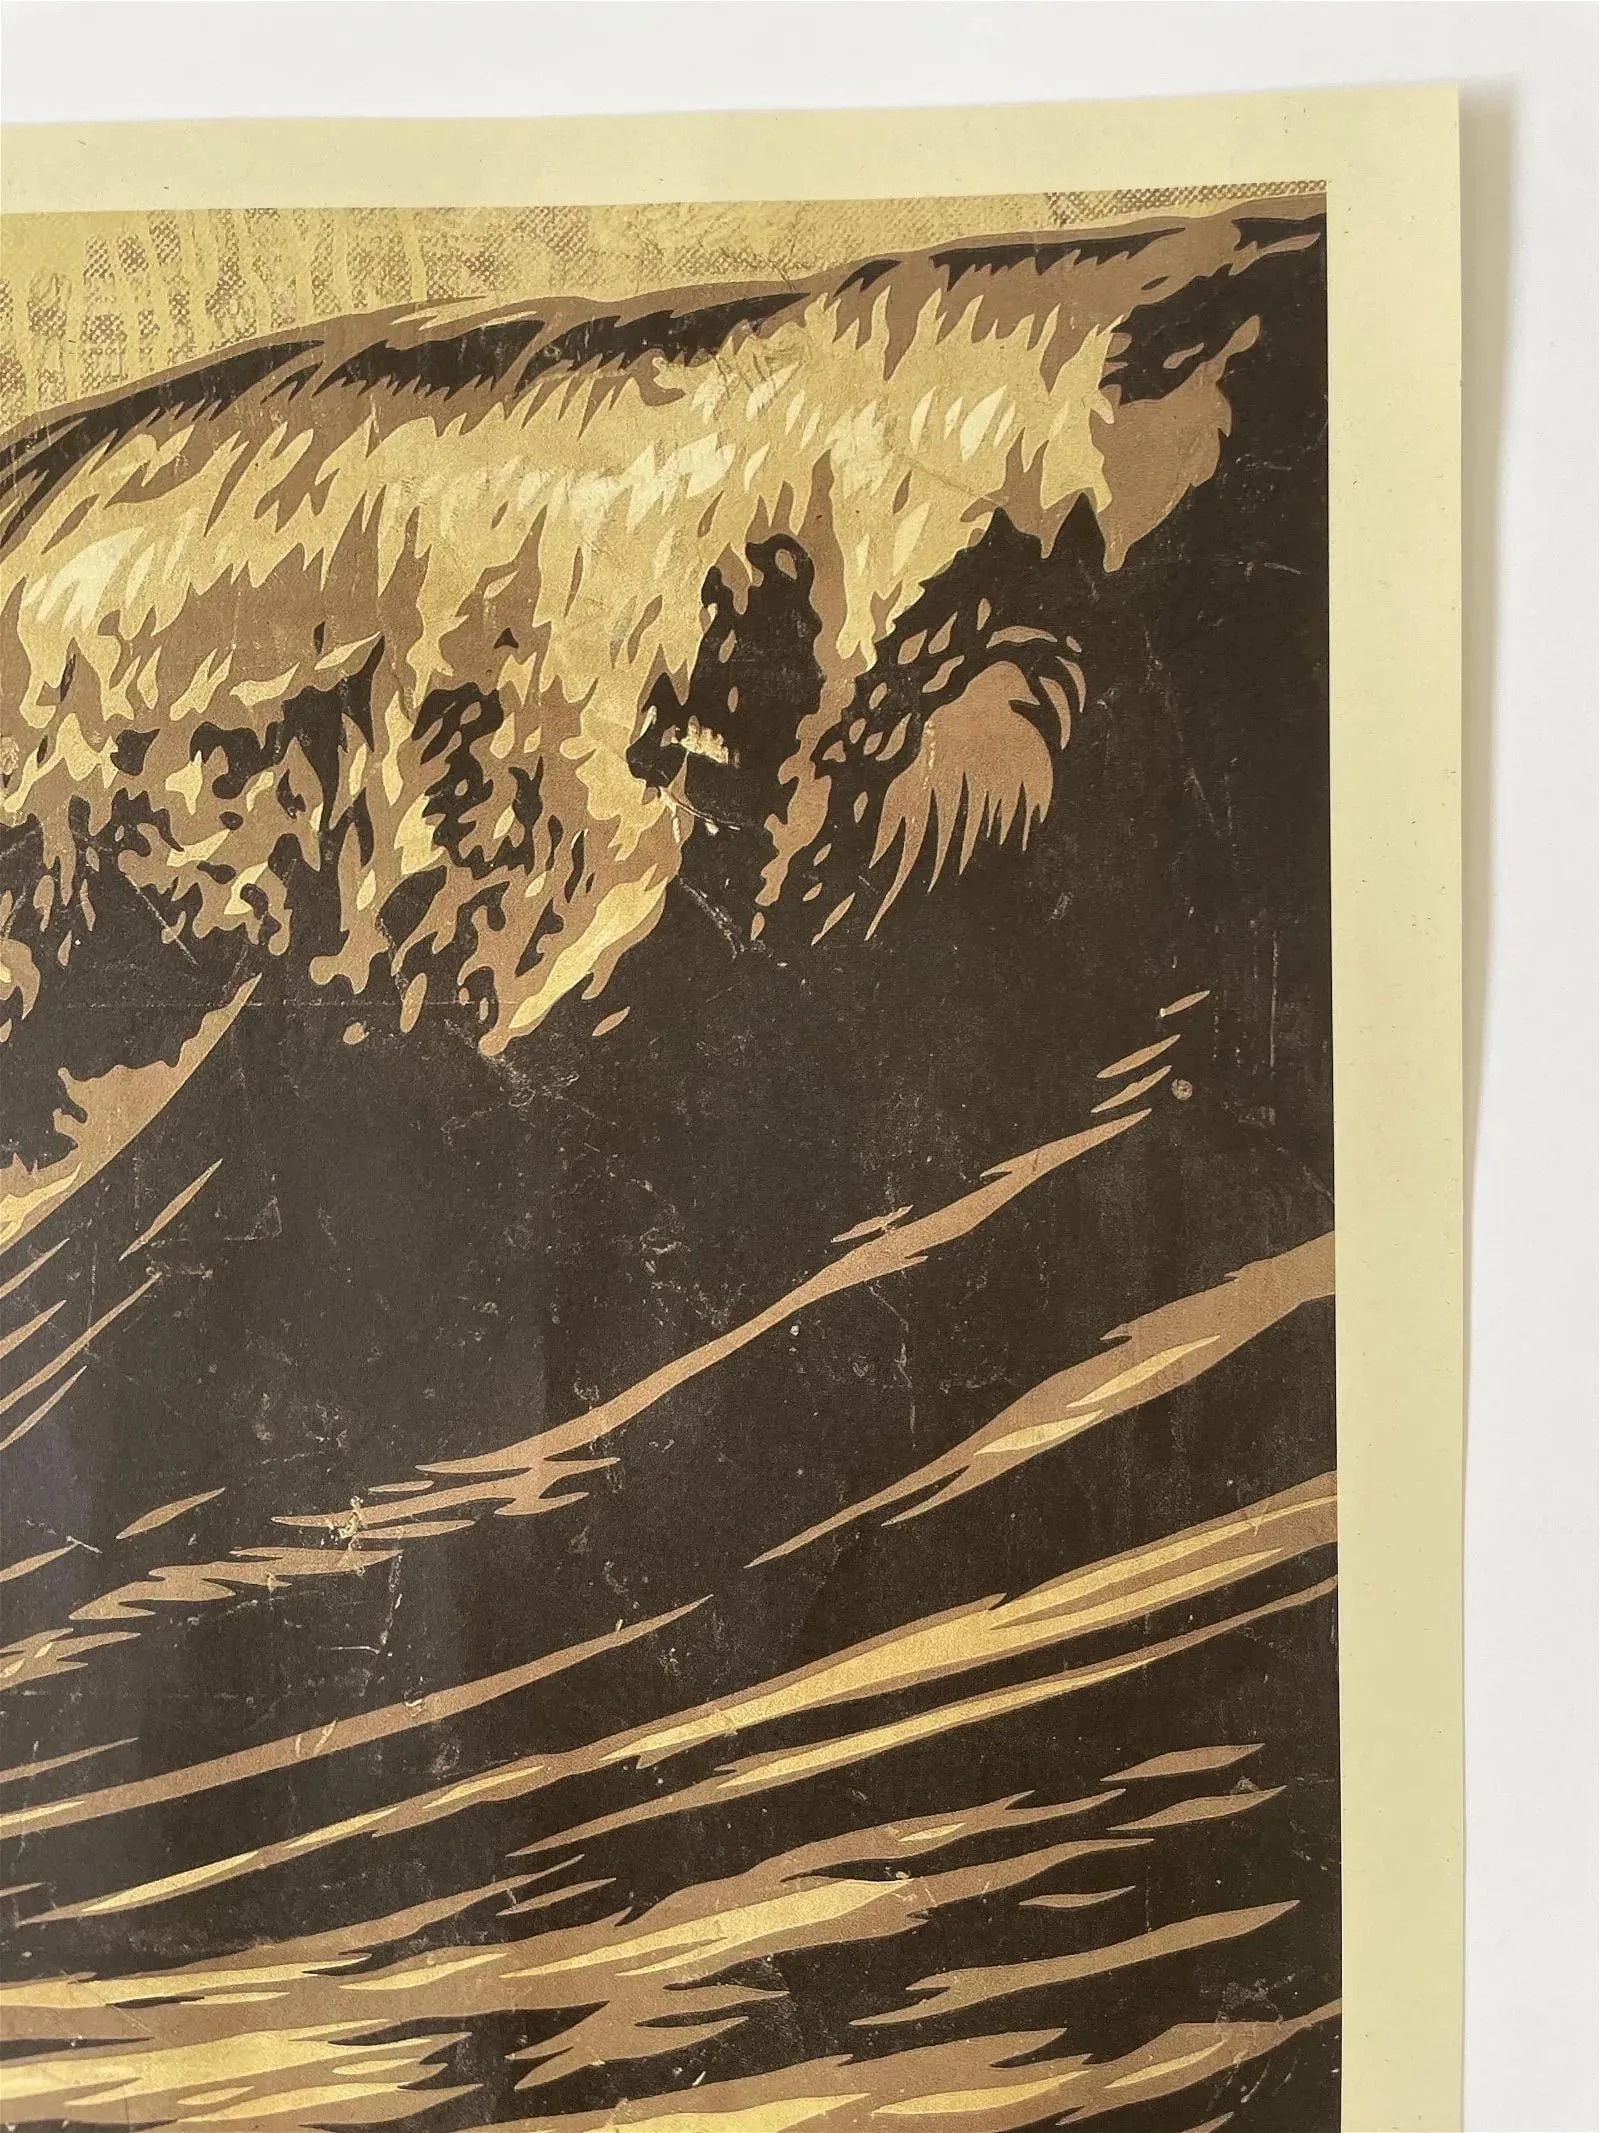 Shepard Fairey Signed "Dark Wave" Offset Lithograph - Image 2 of 8